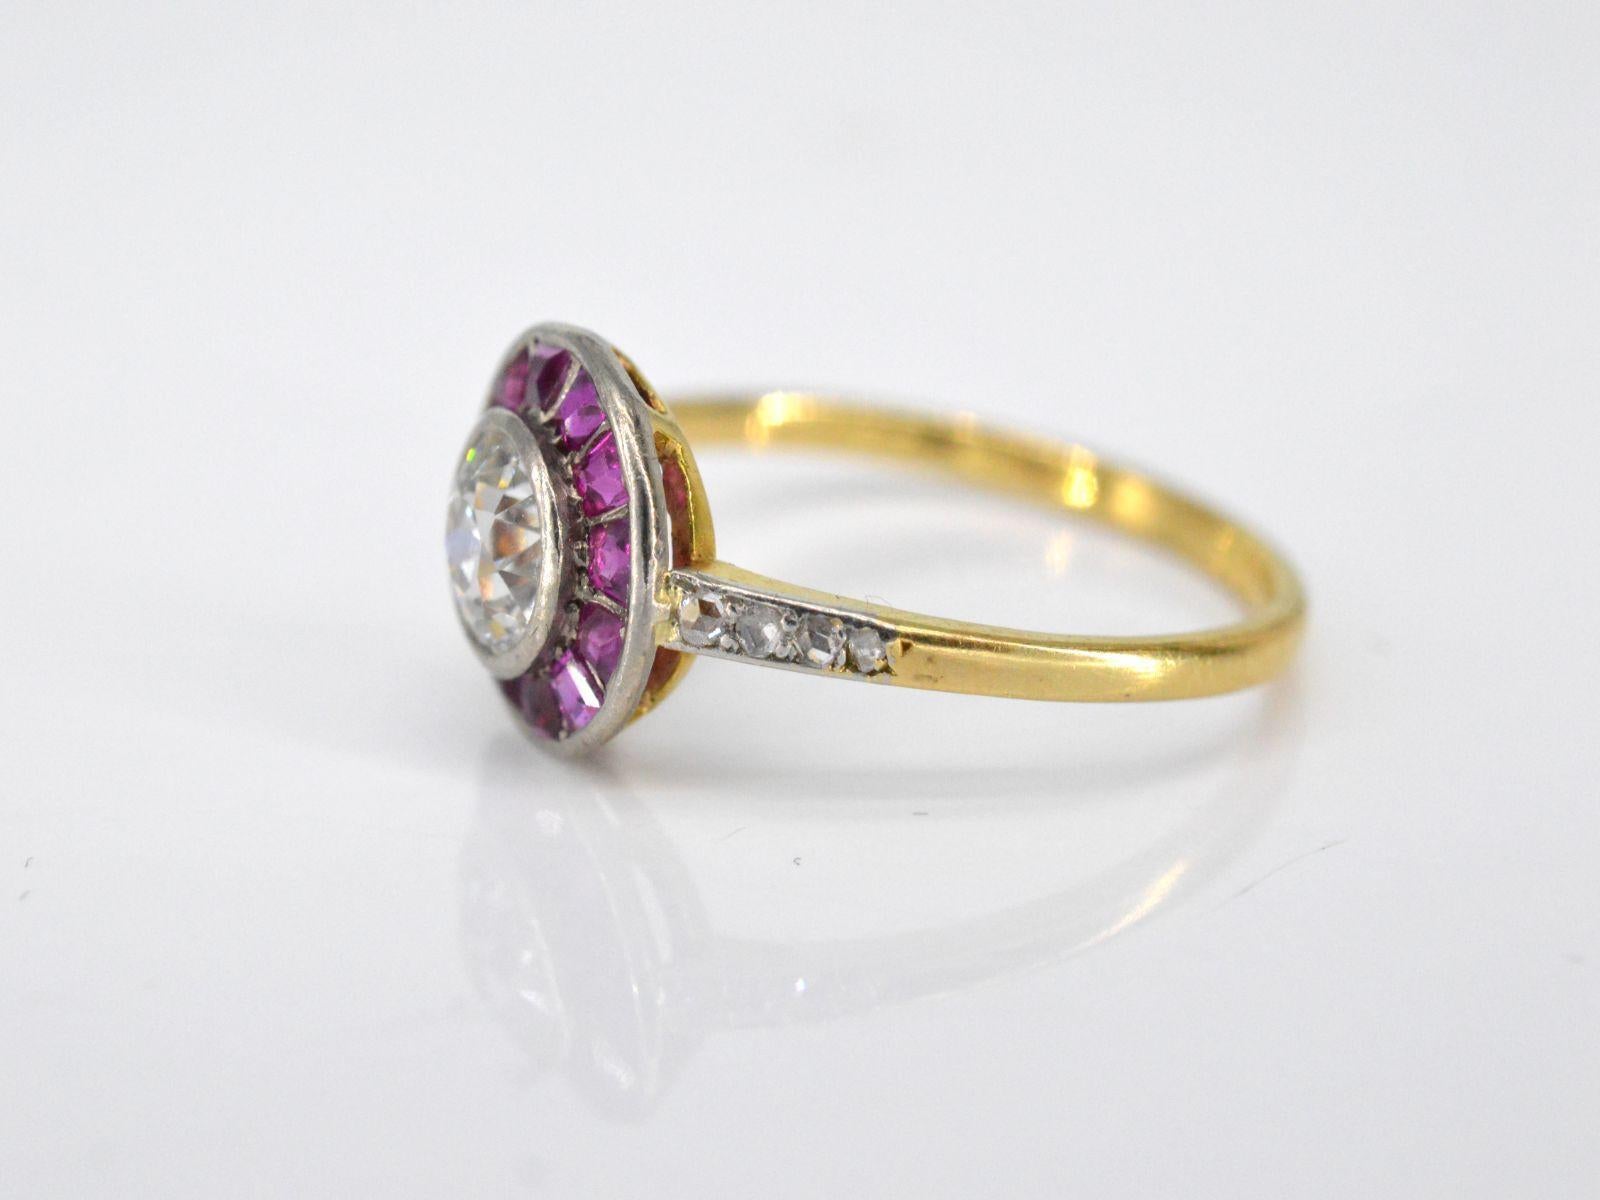 Old European Cut Art Deco Yellow Gold Ring with Central Diamond Surrounded by Ruby For Sale